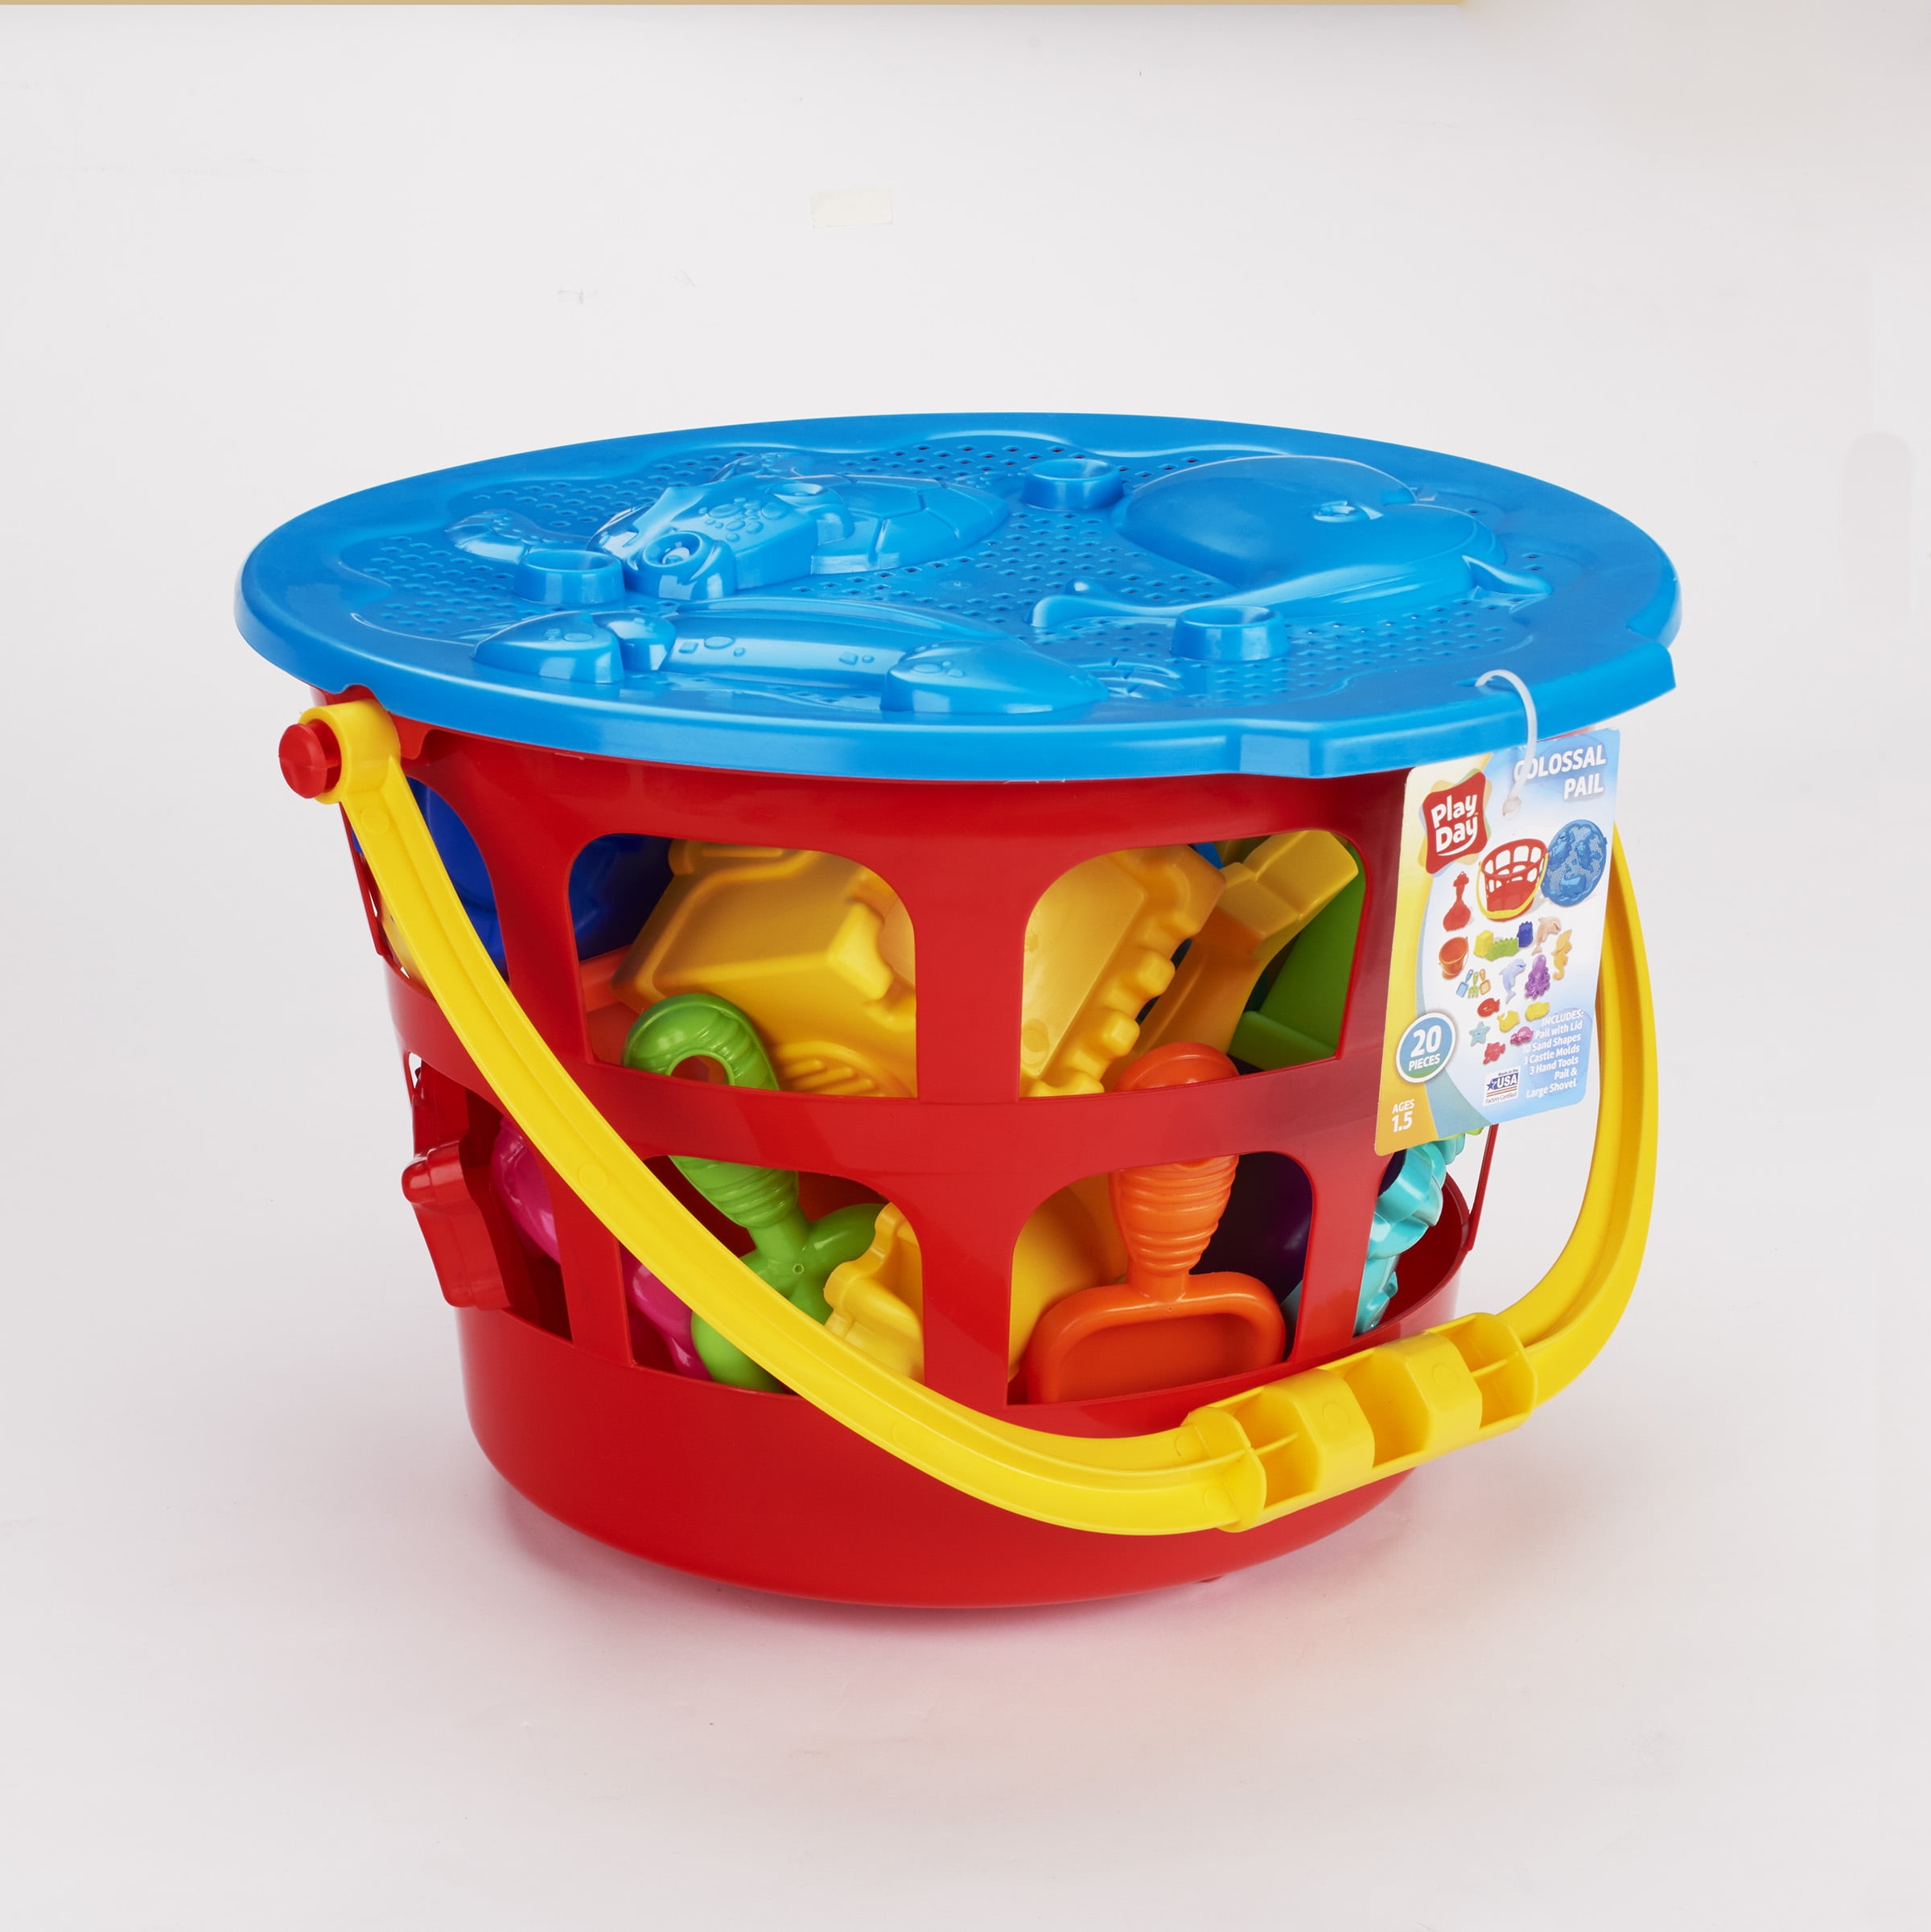 Details about   NEW PLAY DAY crab 6 PIECE SAND TOOL BEACH PAIL BASKET SET AGES 2+ 